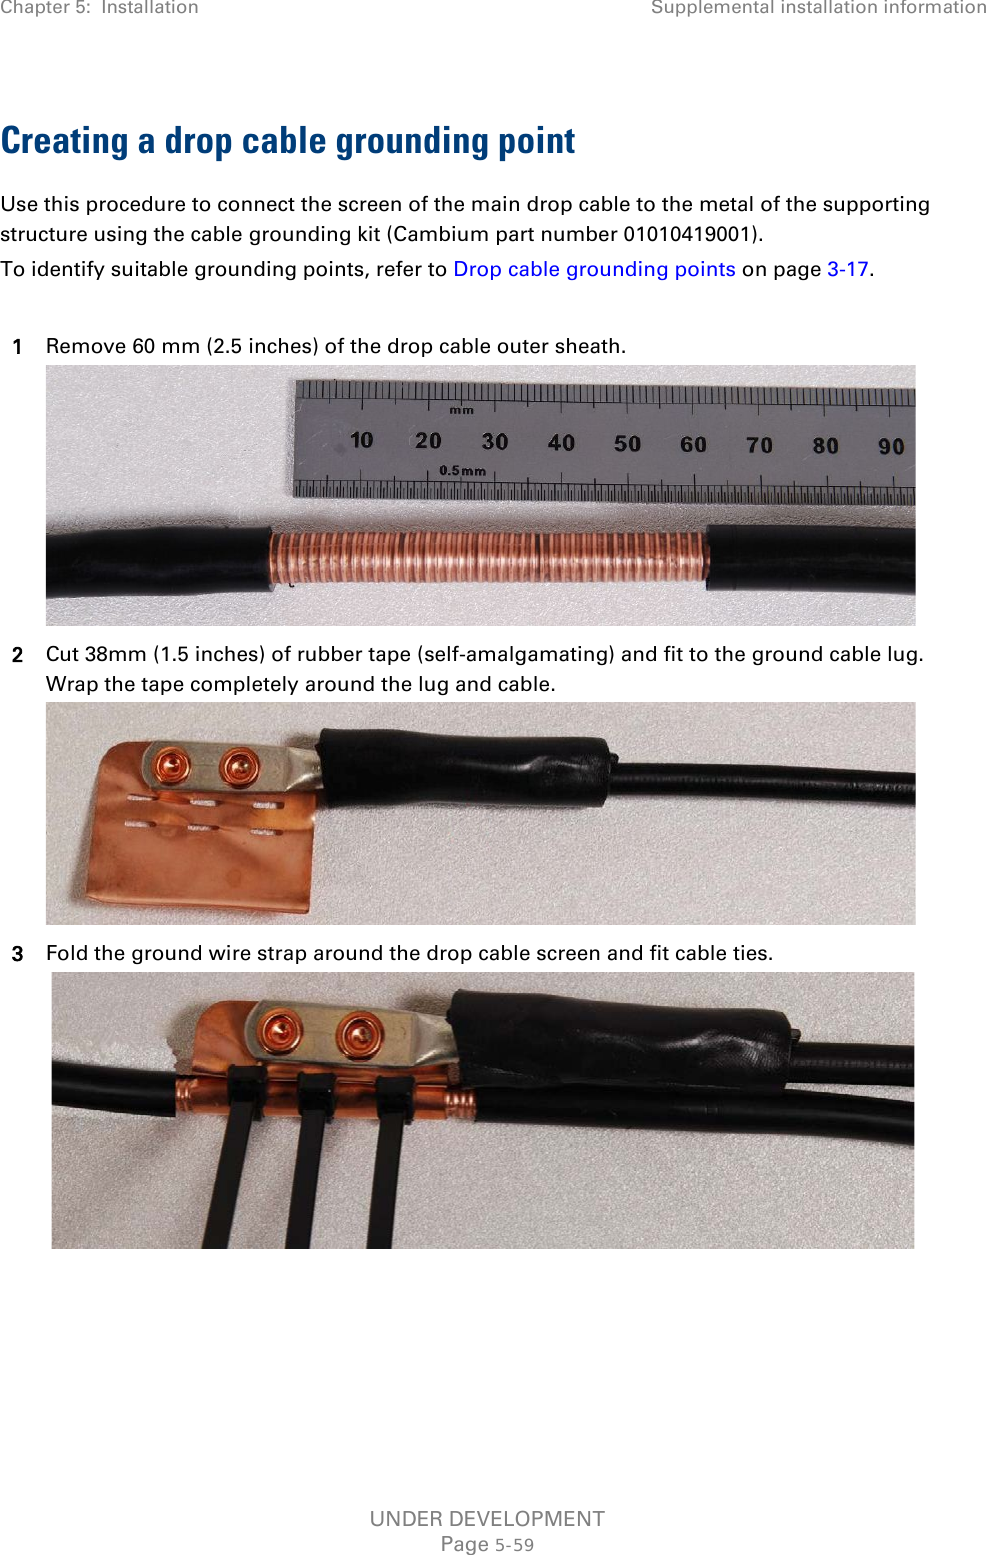 Chapter 5:  Installation Supplemental installation information  Creating a drop cable grounding point Use this procedure to connect the screen of the main drop cable to the metal of the supporting structure using the cable grounding kit (Cambium part number 01010419001). To identify suitable grounding points, refer to Drop cable grounding points on page 3-17.  1 Remove 60 mm (2.5 inches) of the drop cable outer sheath.  2 Cut 38mm (1.5 inches) of rubber tape (self-amalgamating) and fit to the ground cable lug. Wrap the tape completely around the lug and cable.  3 Fold the ground wire strap around the drop cable screen and fit cable ties.    UNDER DEVELOPMENT Page 5-59 